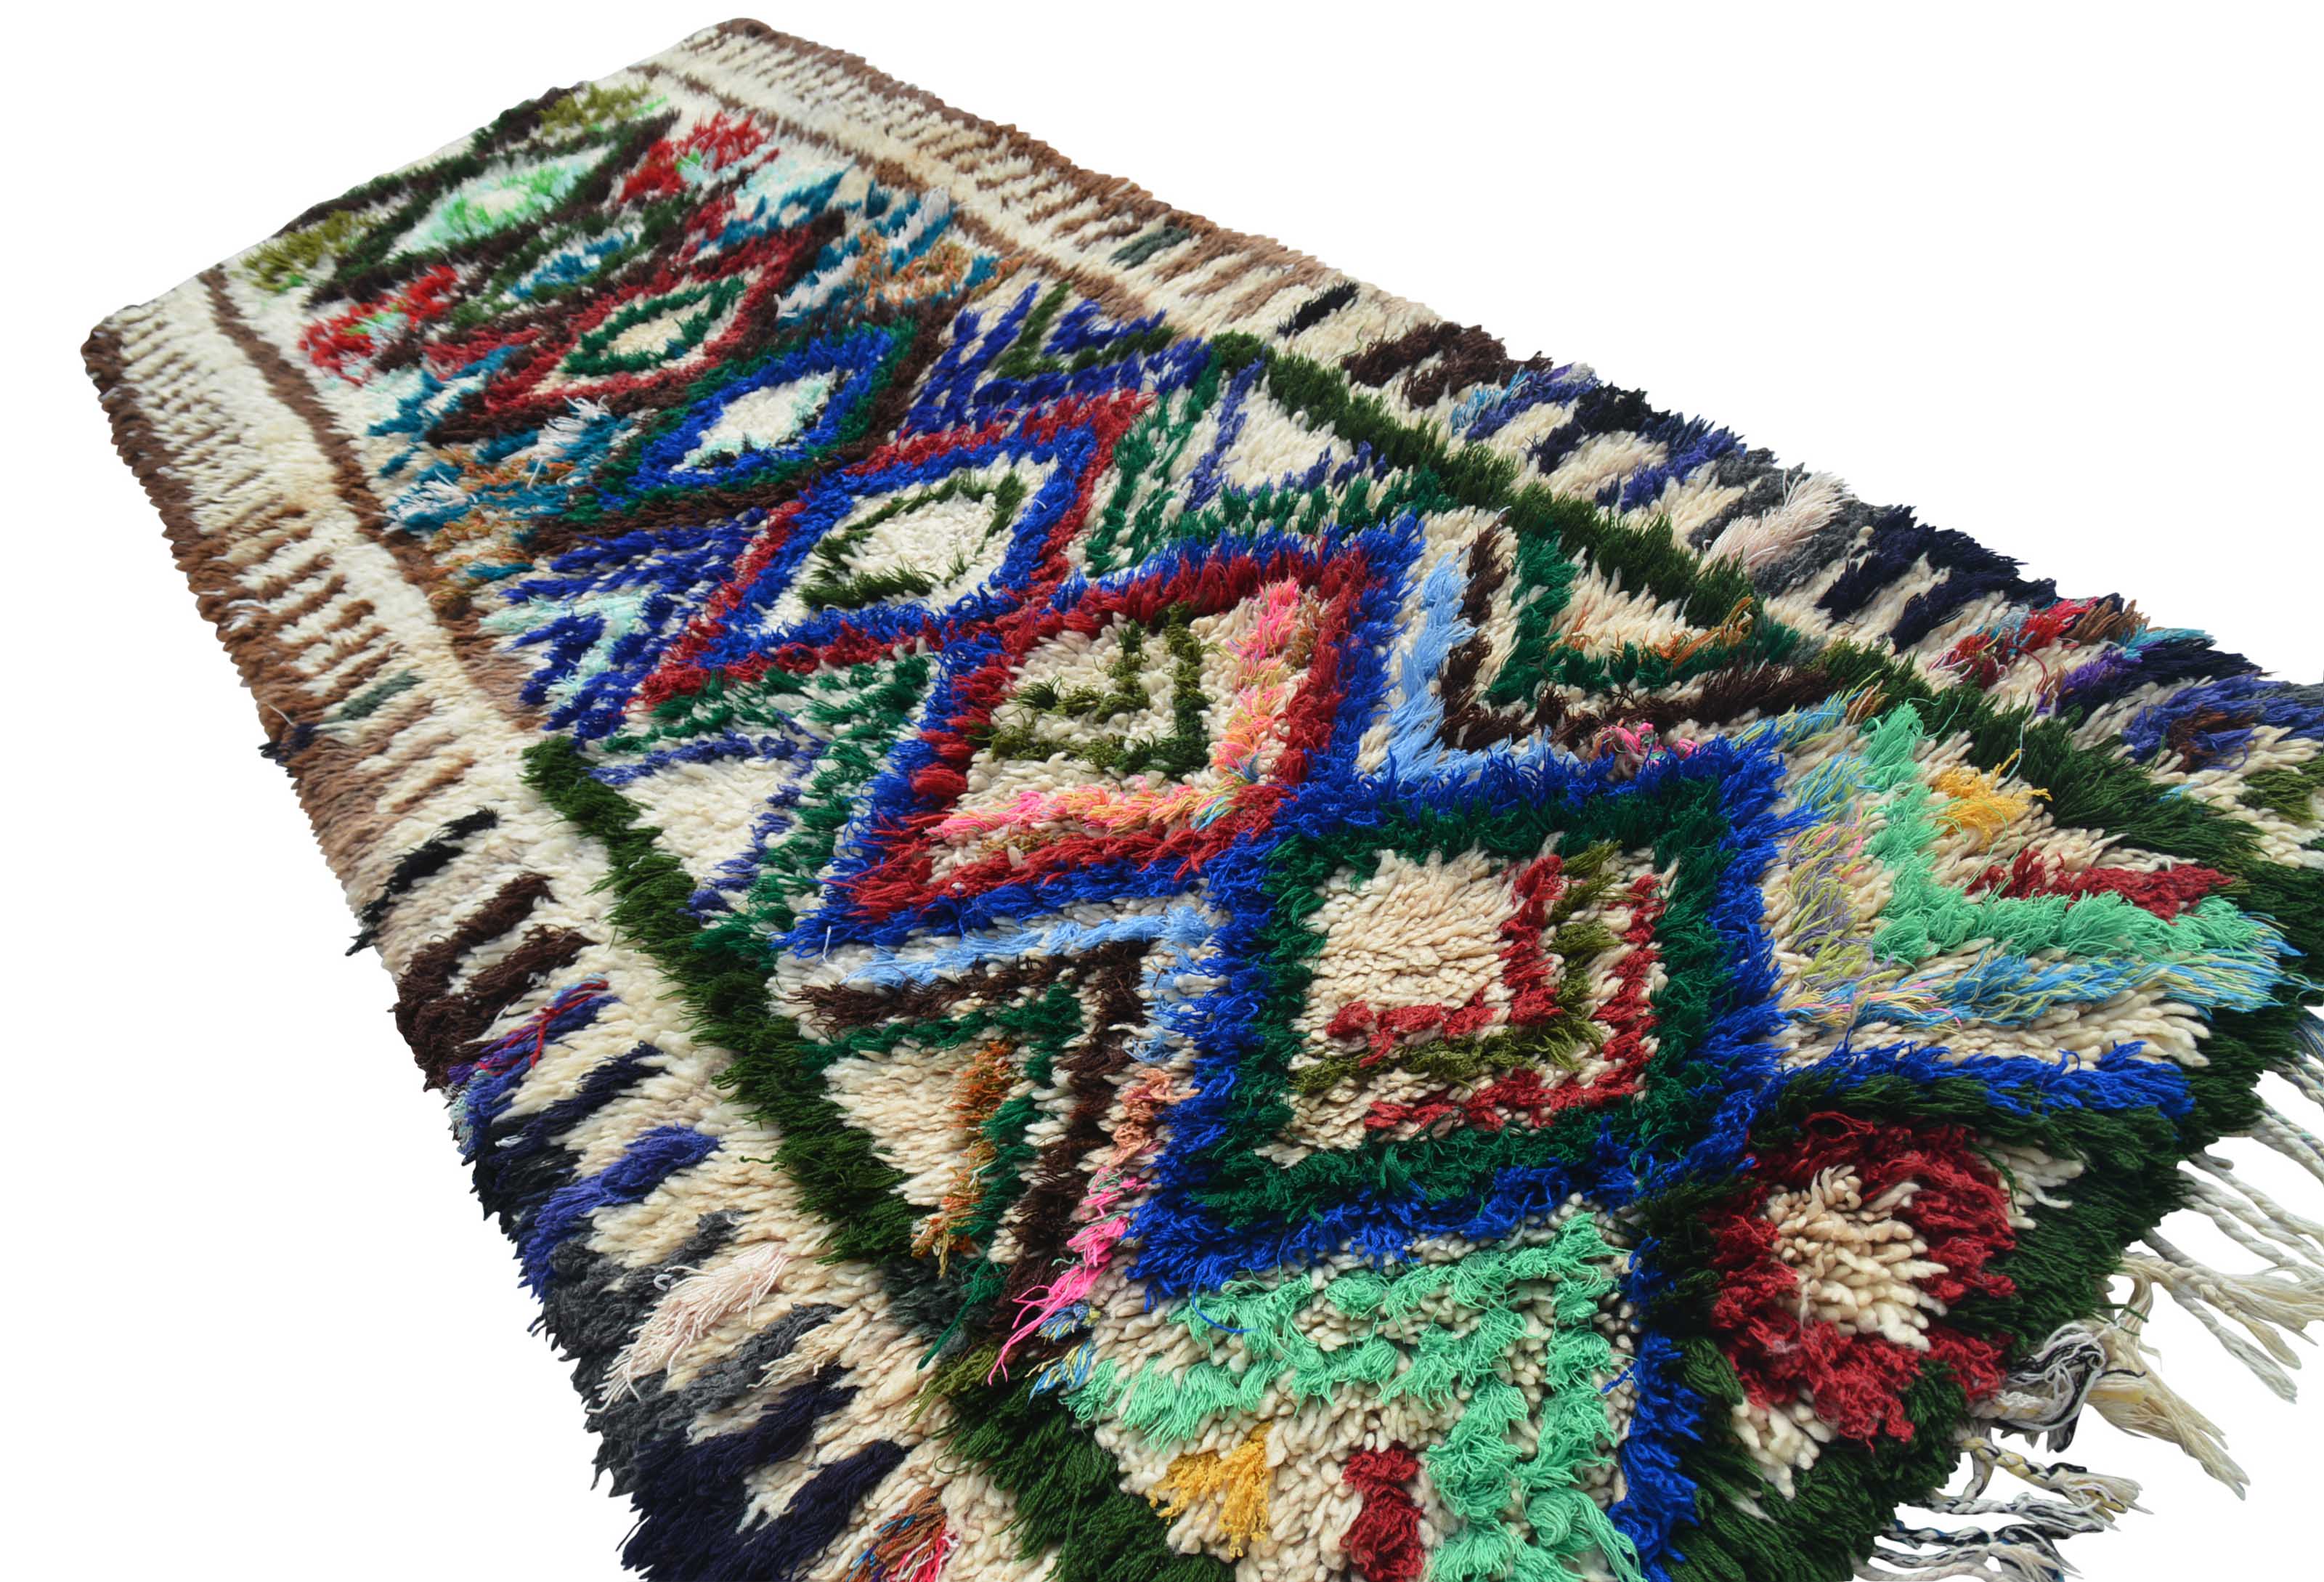 Vintage Moroccan Rug Vintage Rugs 8x10 Moroccan Rug Small Size | Illuminate Collective illuminate collective